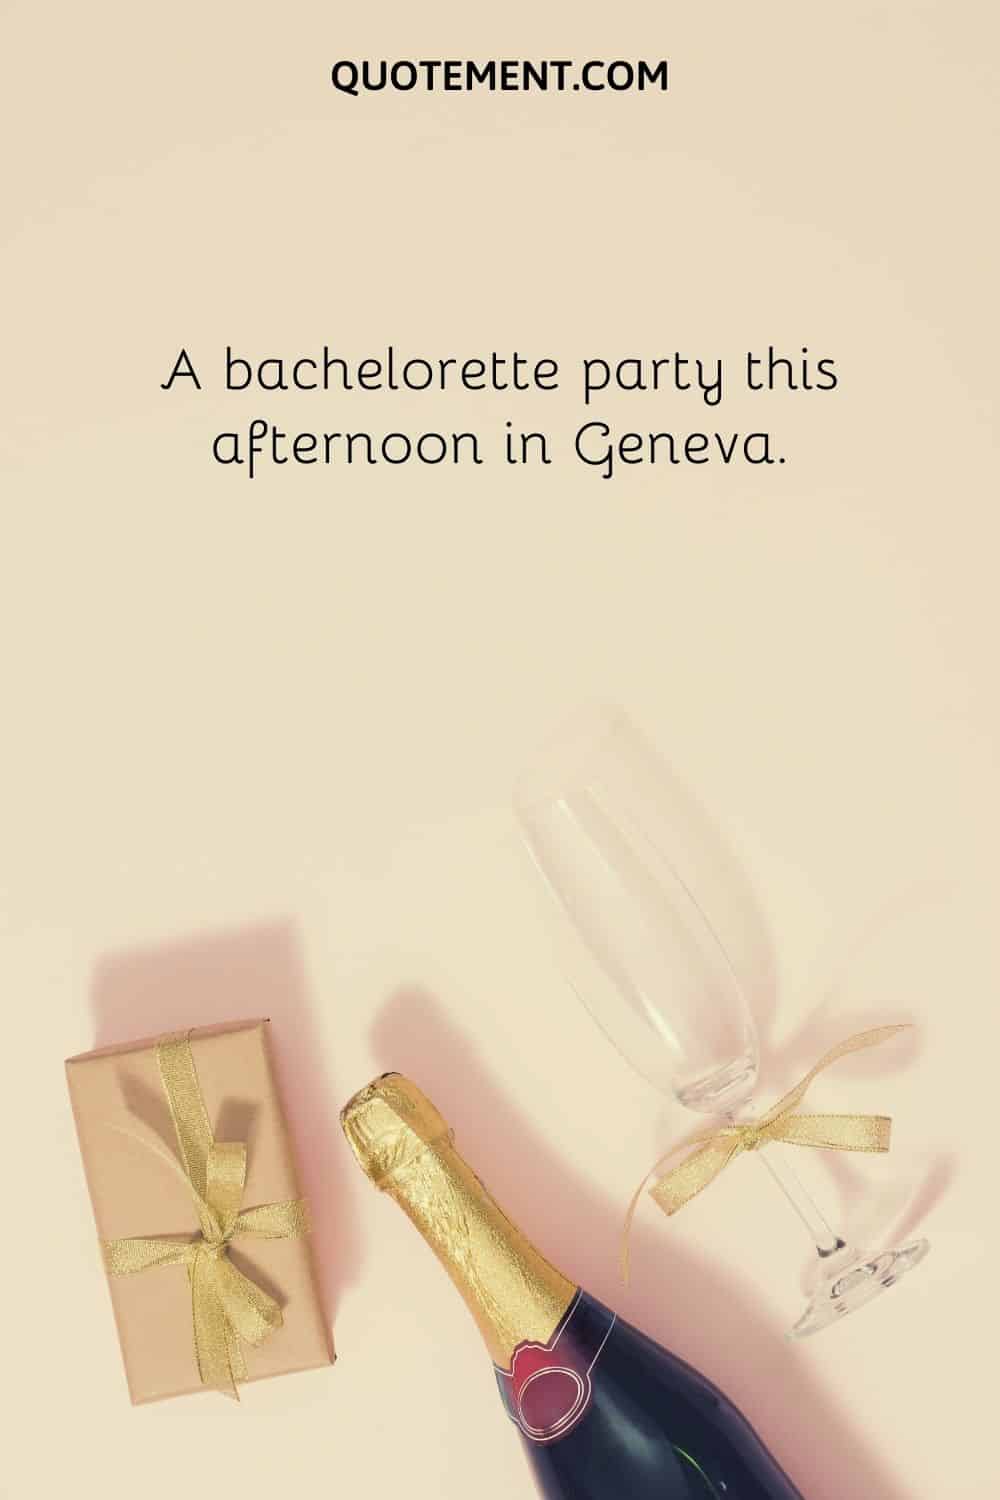 A bachelorette party this afternoon in Geneva